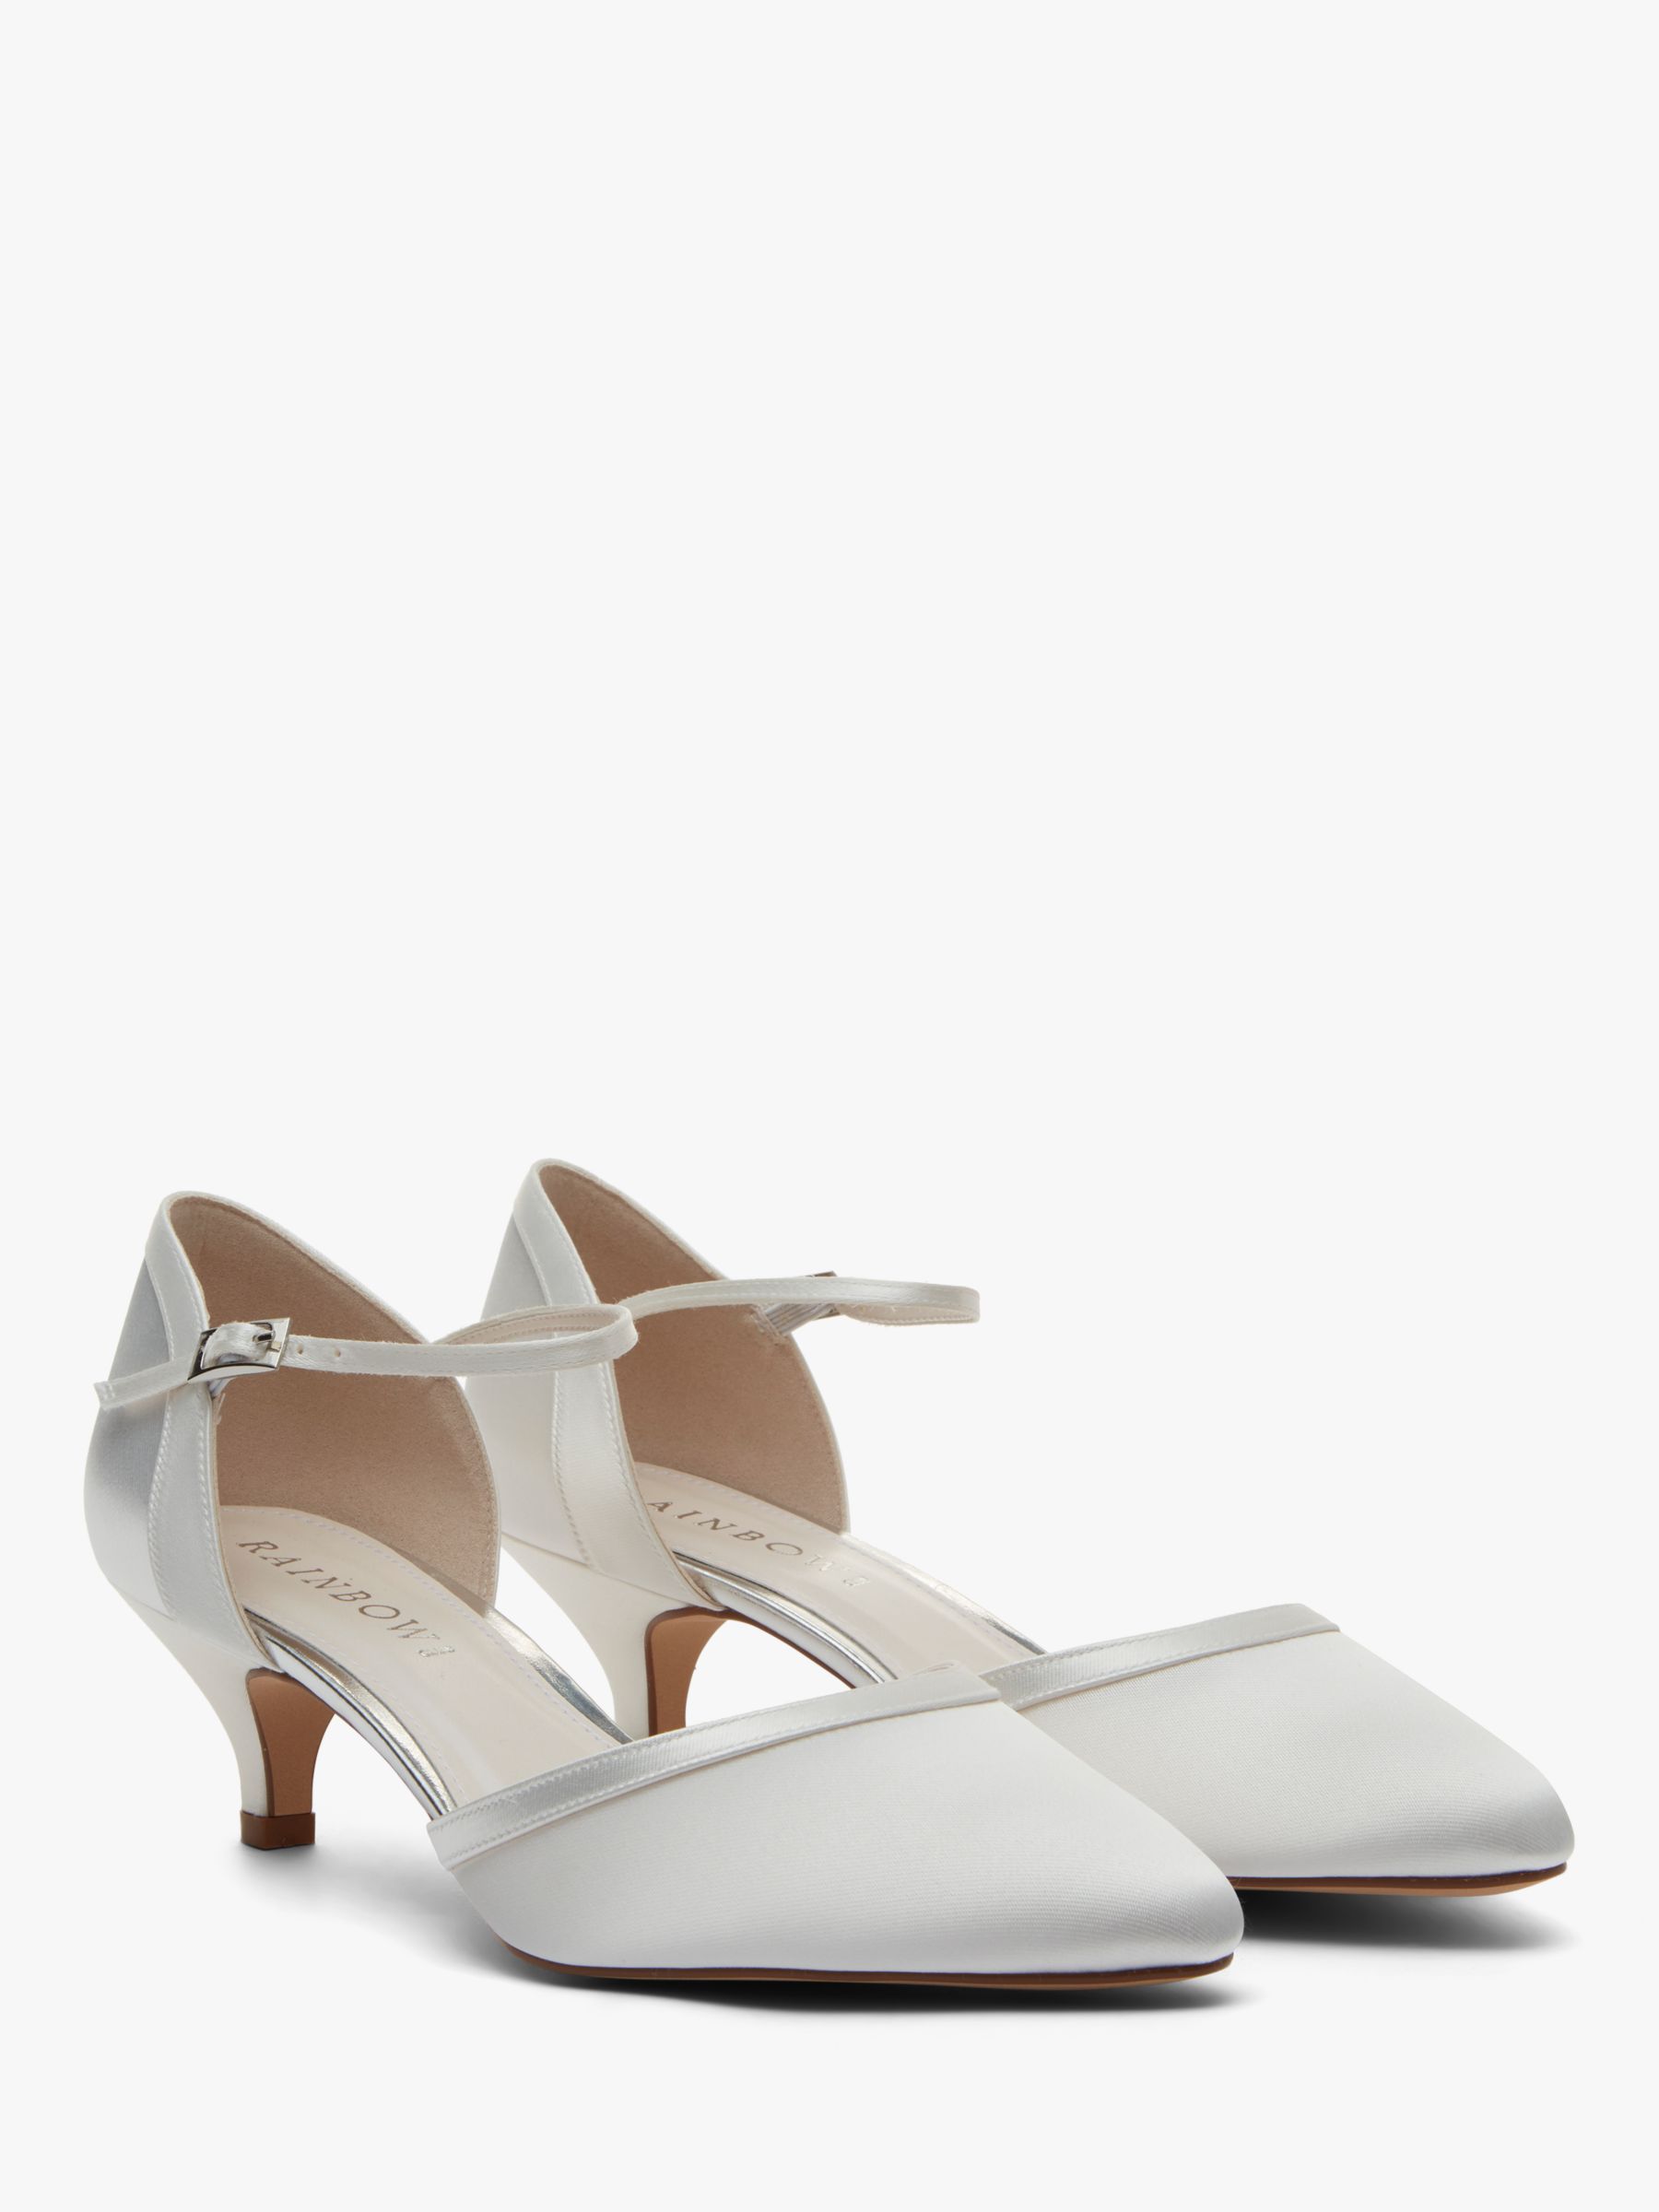 Rainbow Club Brianna Two Part Court Shoes, Ivory at John Lewis